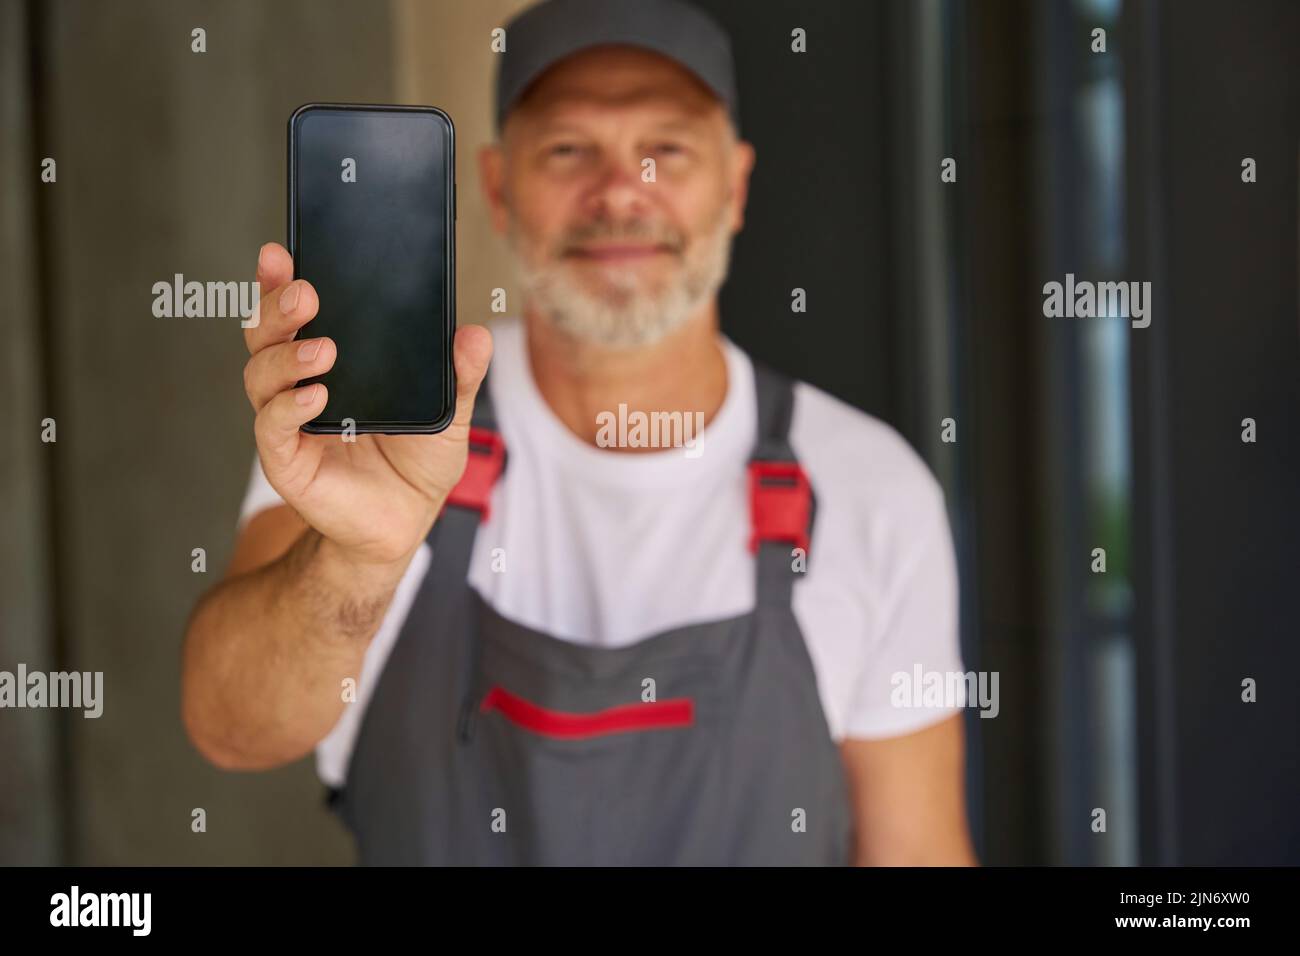 Smiling builder wearing cap and overalls shows mobile phone Stock Photo